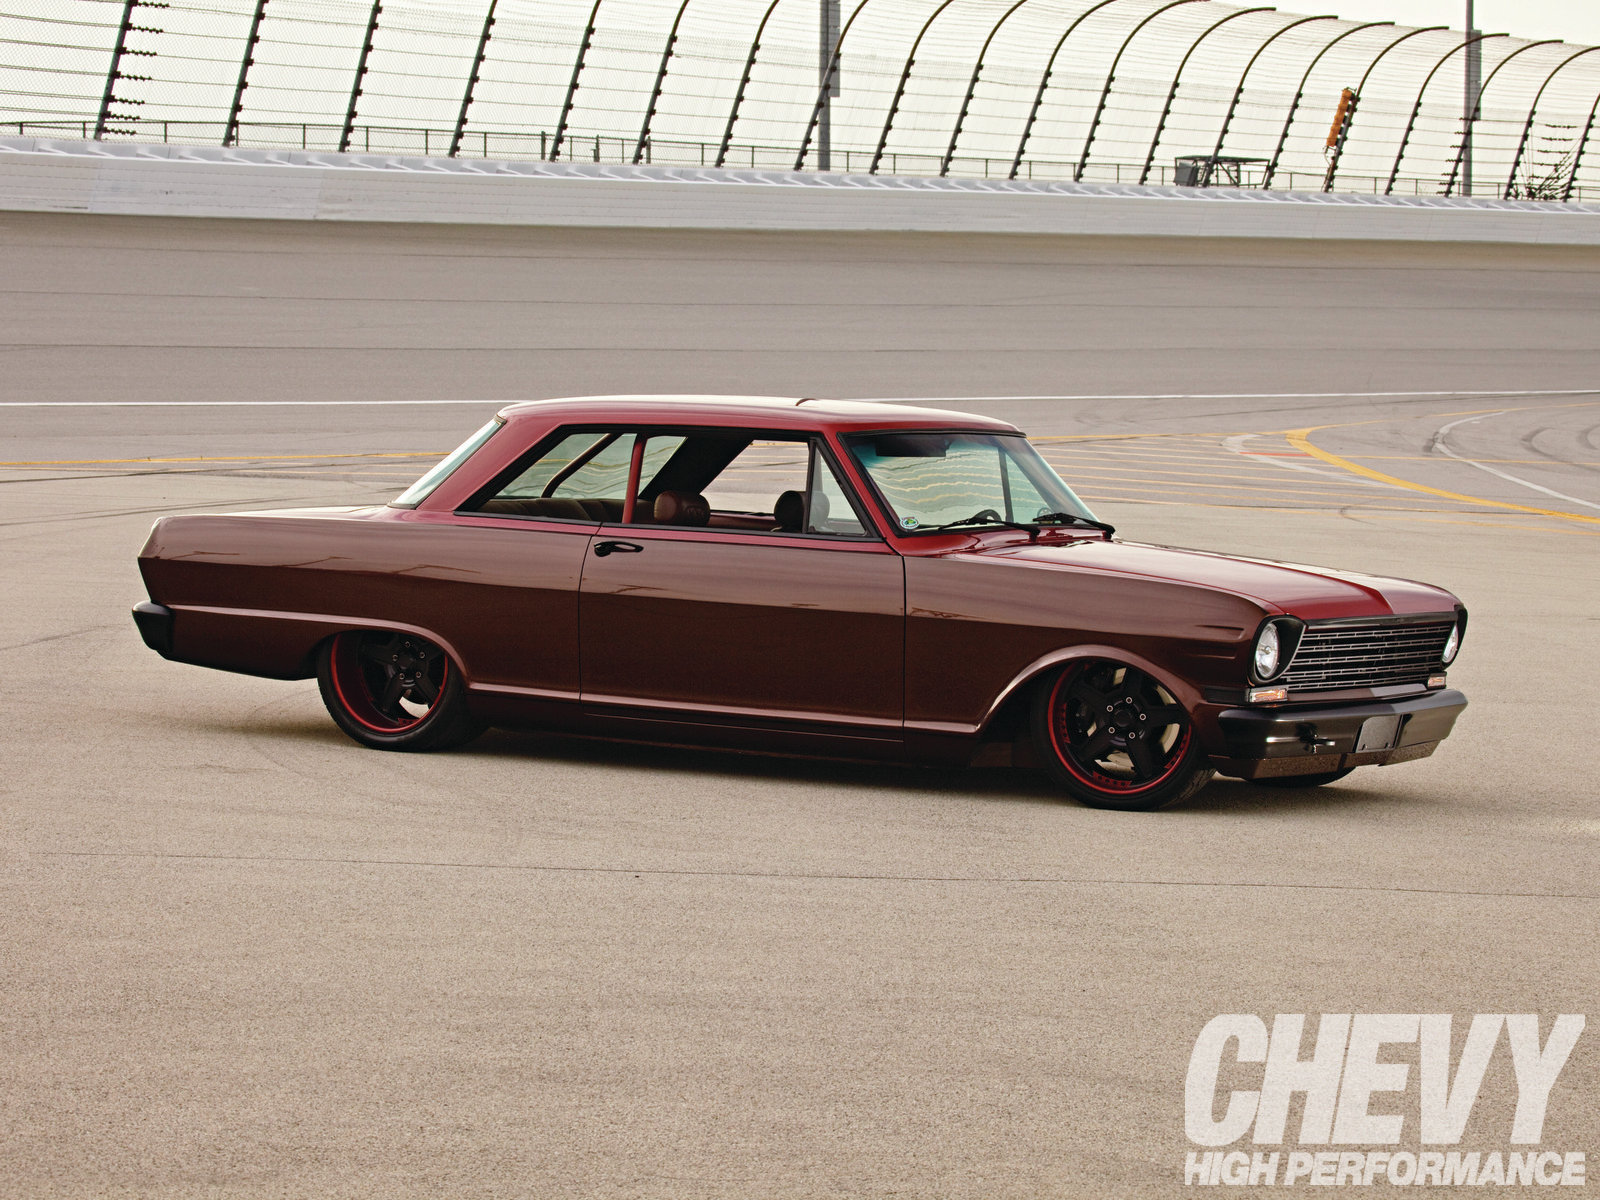 chevrolet, Nova, Hot, Rods, Muscle, Cars, Race, Track, Classic, Tuning Wallpaper